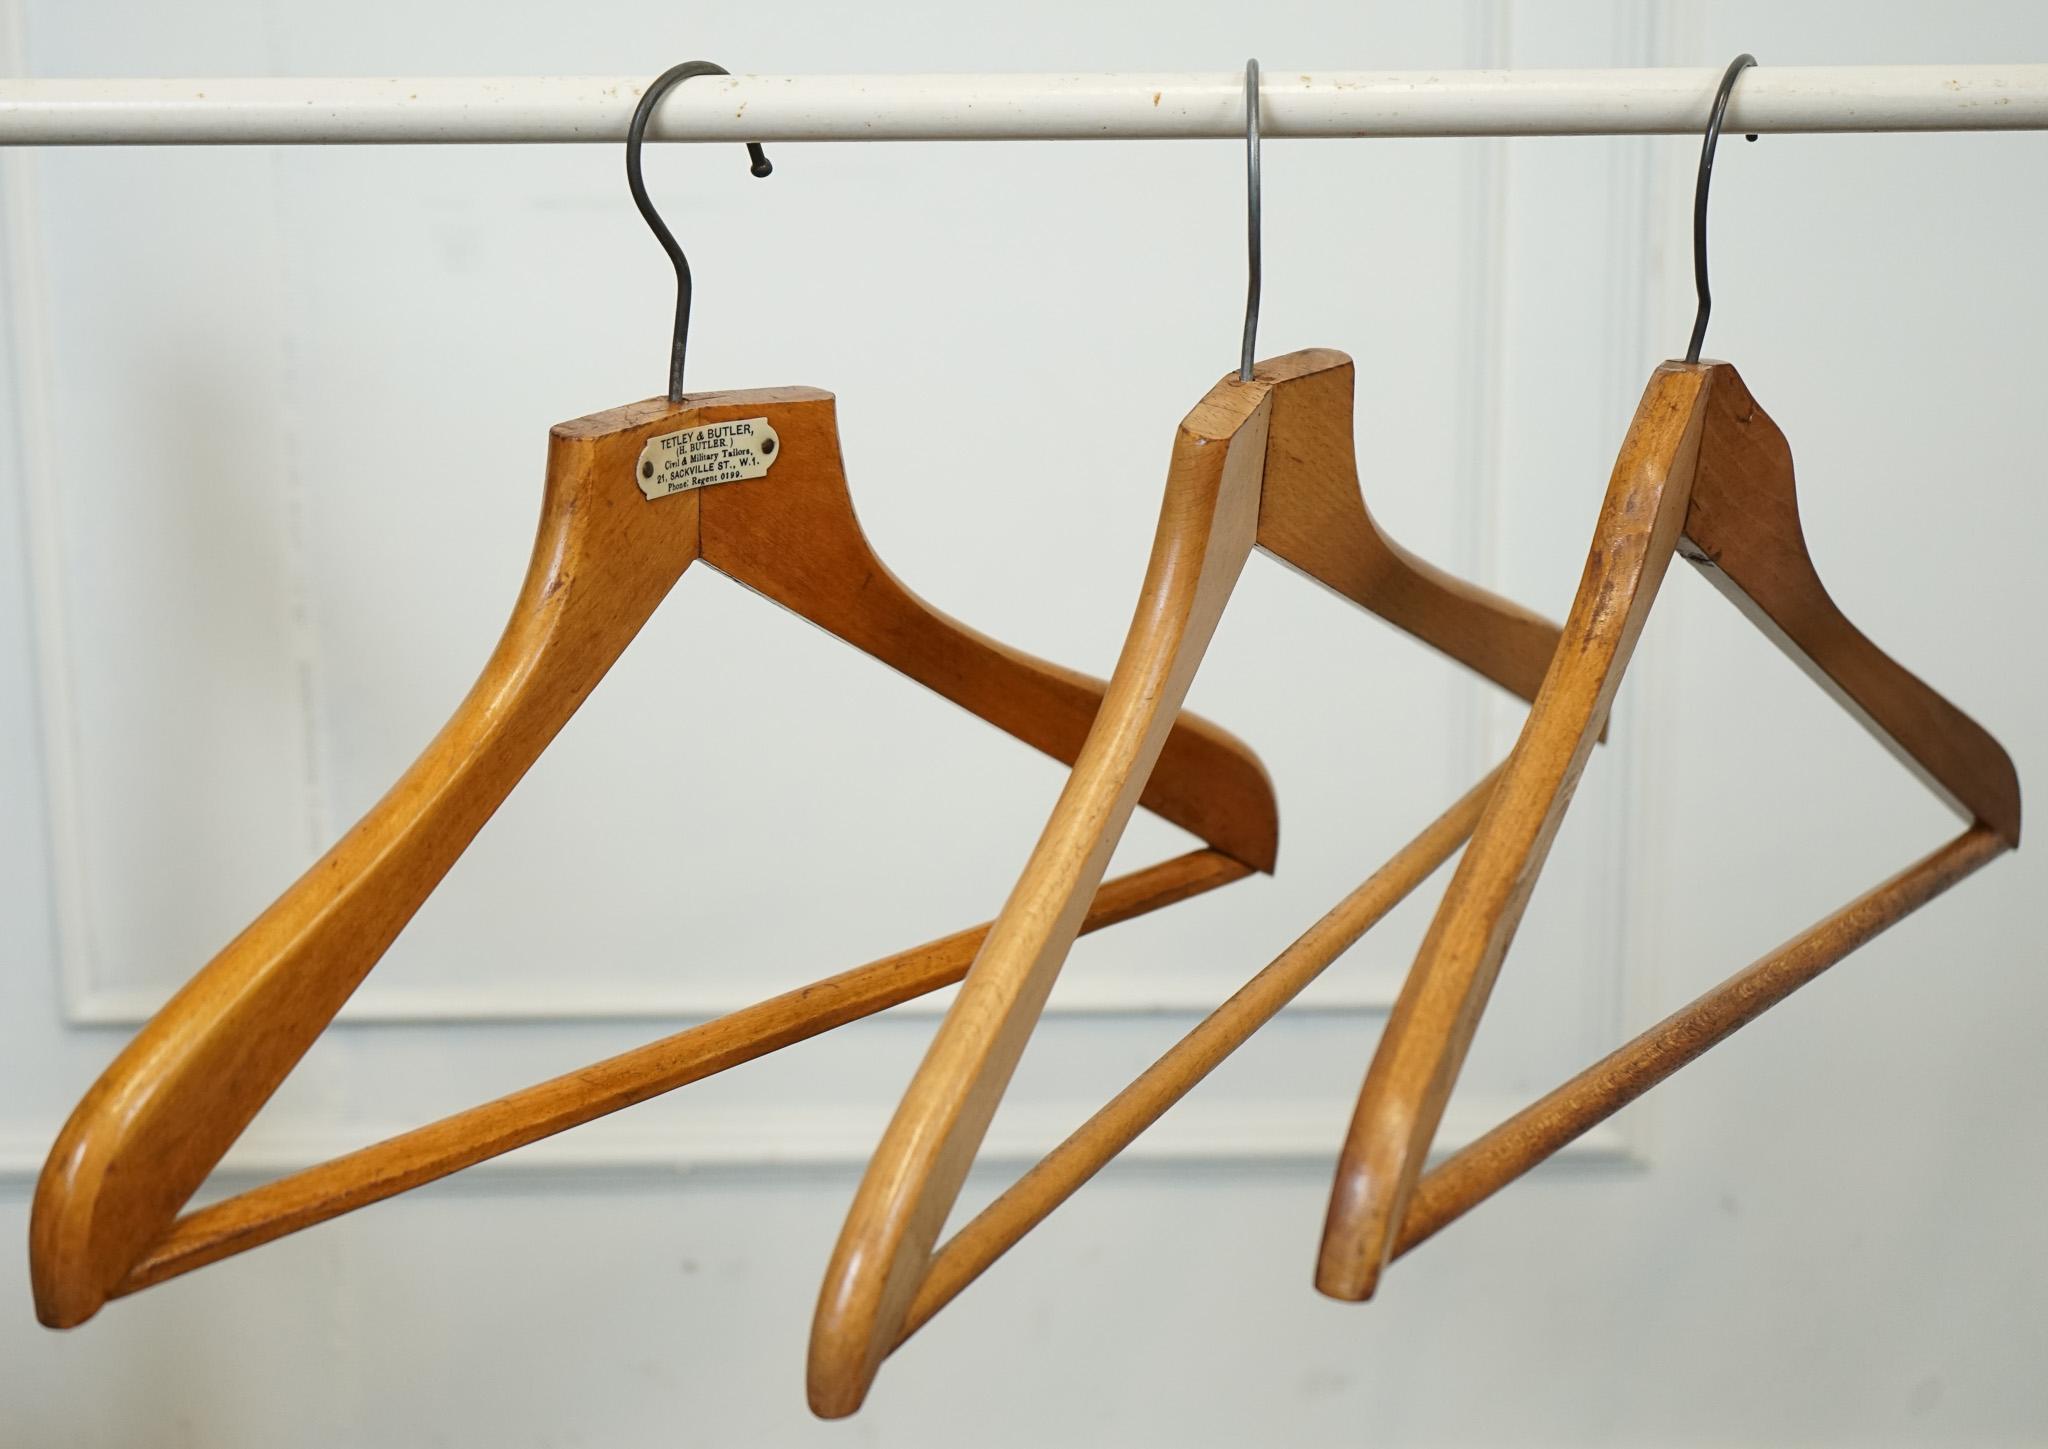 

We are delighted to offer for sale this Lovely Set Of Hangers From Tetley & Butler.

Please carefully examine the pictures to see the condition before purchasing, as they form part of the description. If you have any questions, please message us.